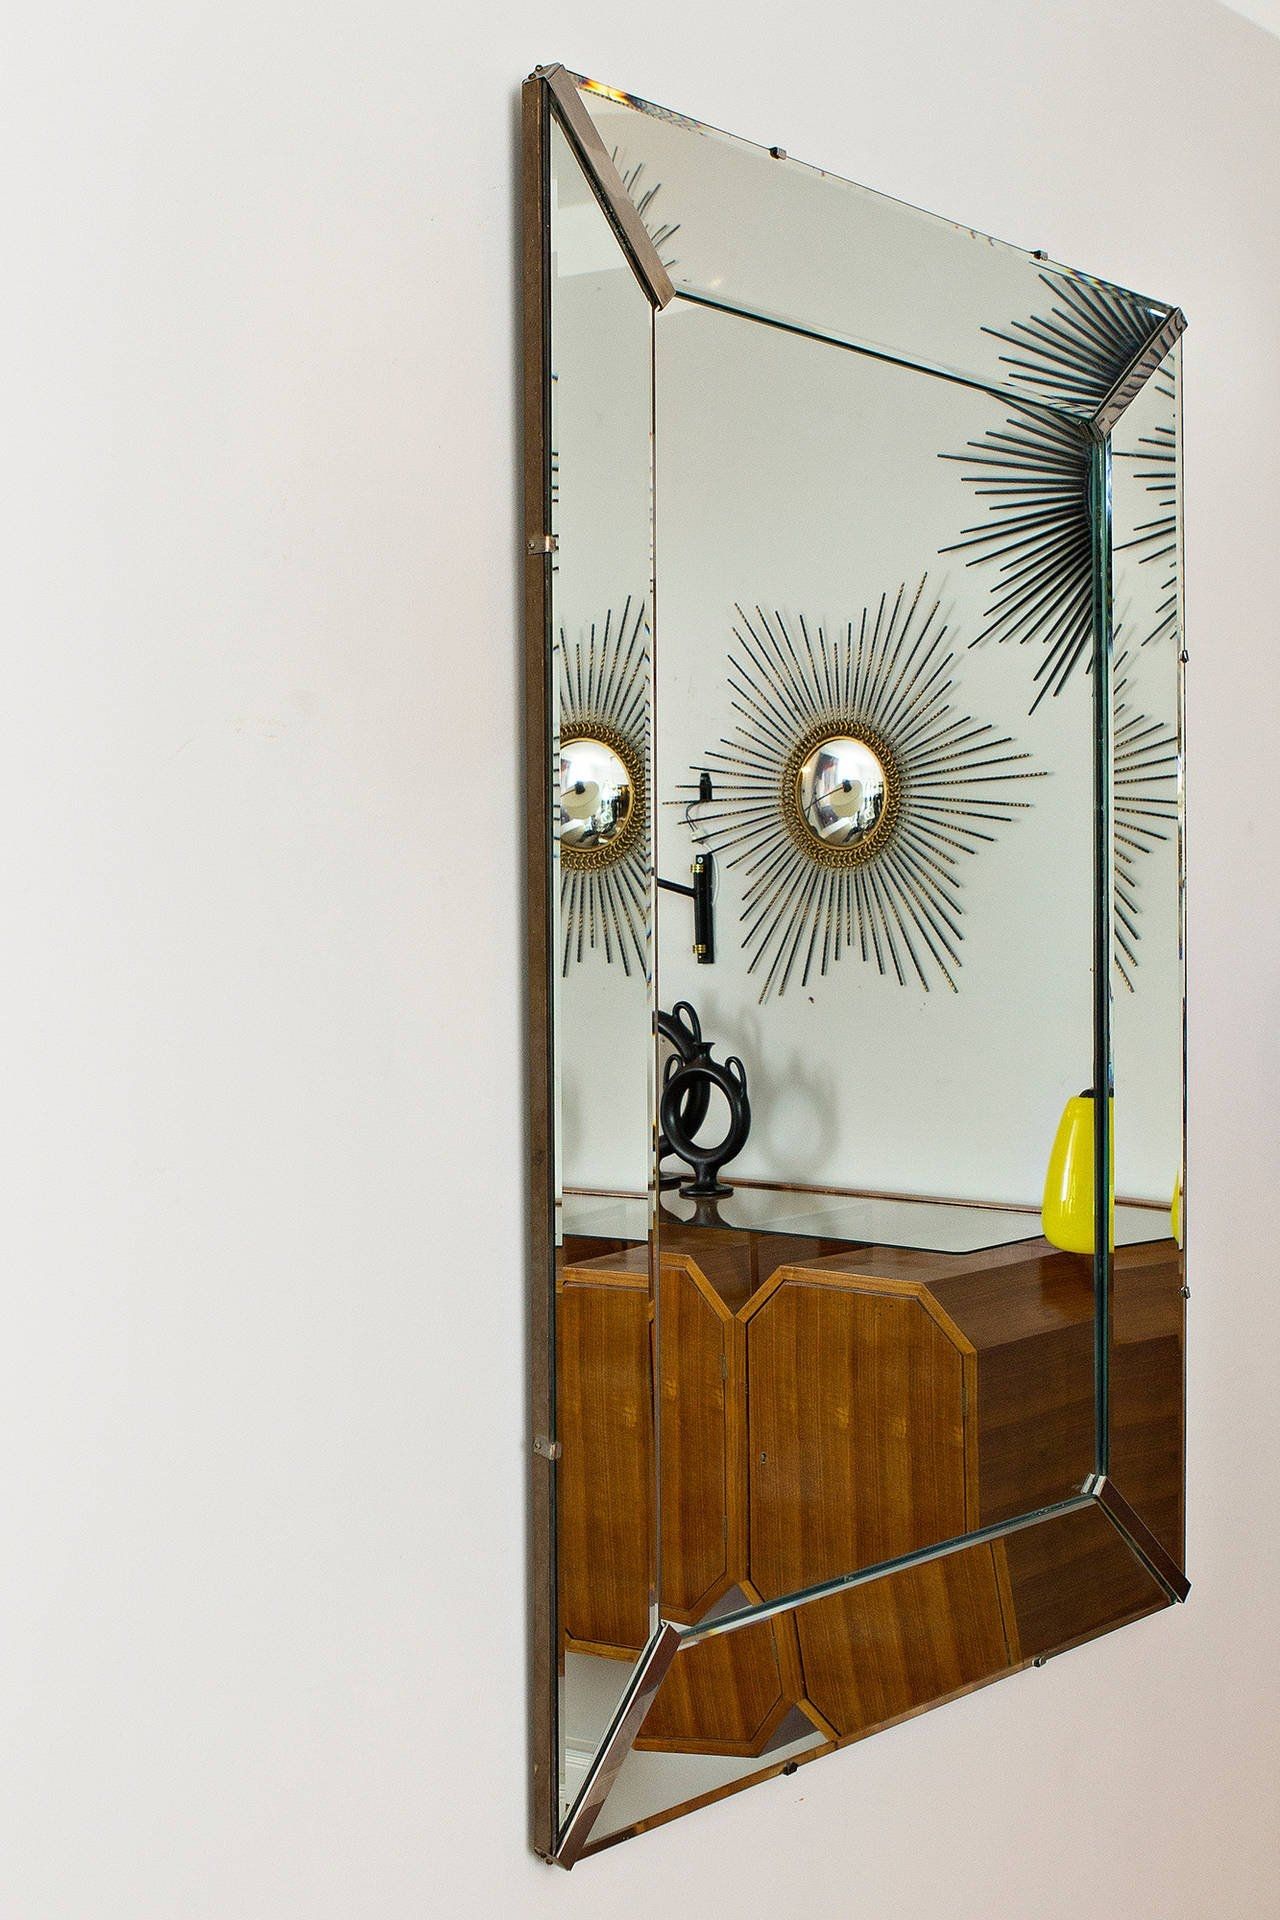 Elegant Art Deco Wall Mirror France Circa 1940 At 1stdibs With Regard To Wall Mirror Art Deco (View 9 of 15)